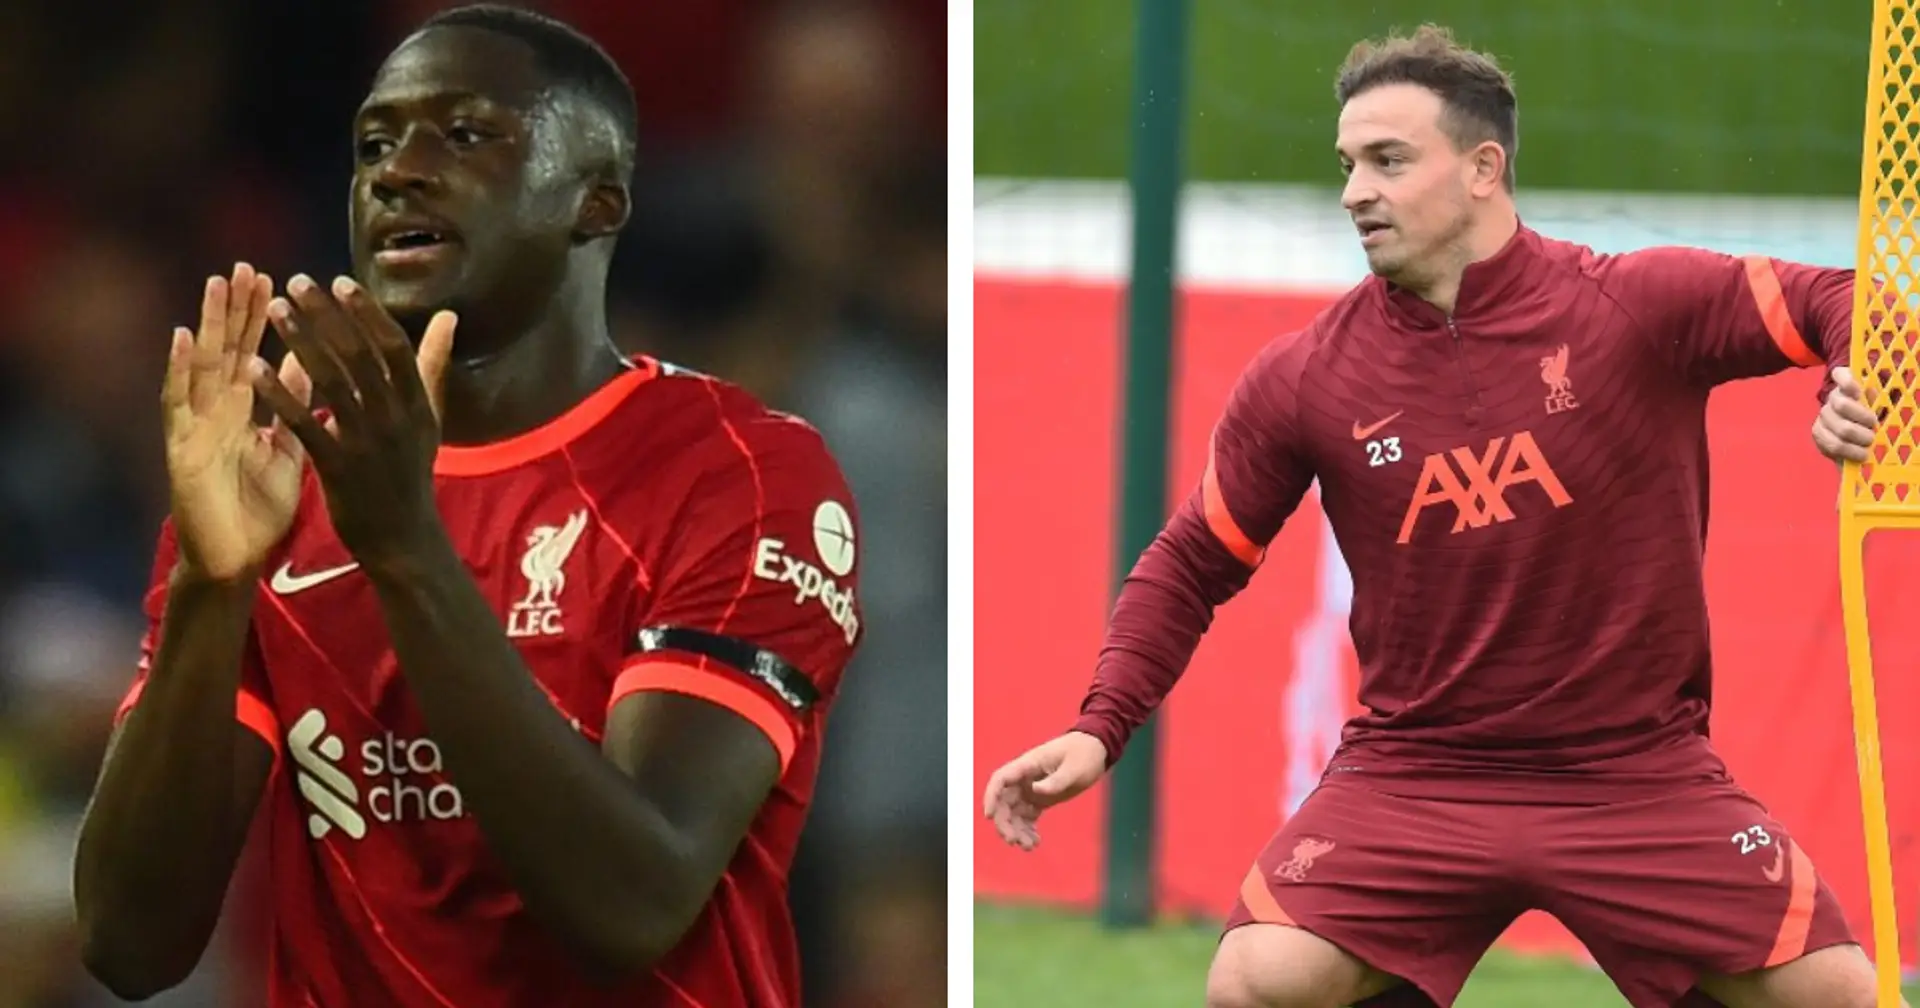 Liverpool reject bid for Shaqiri & 3 more big stories you might've missed